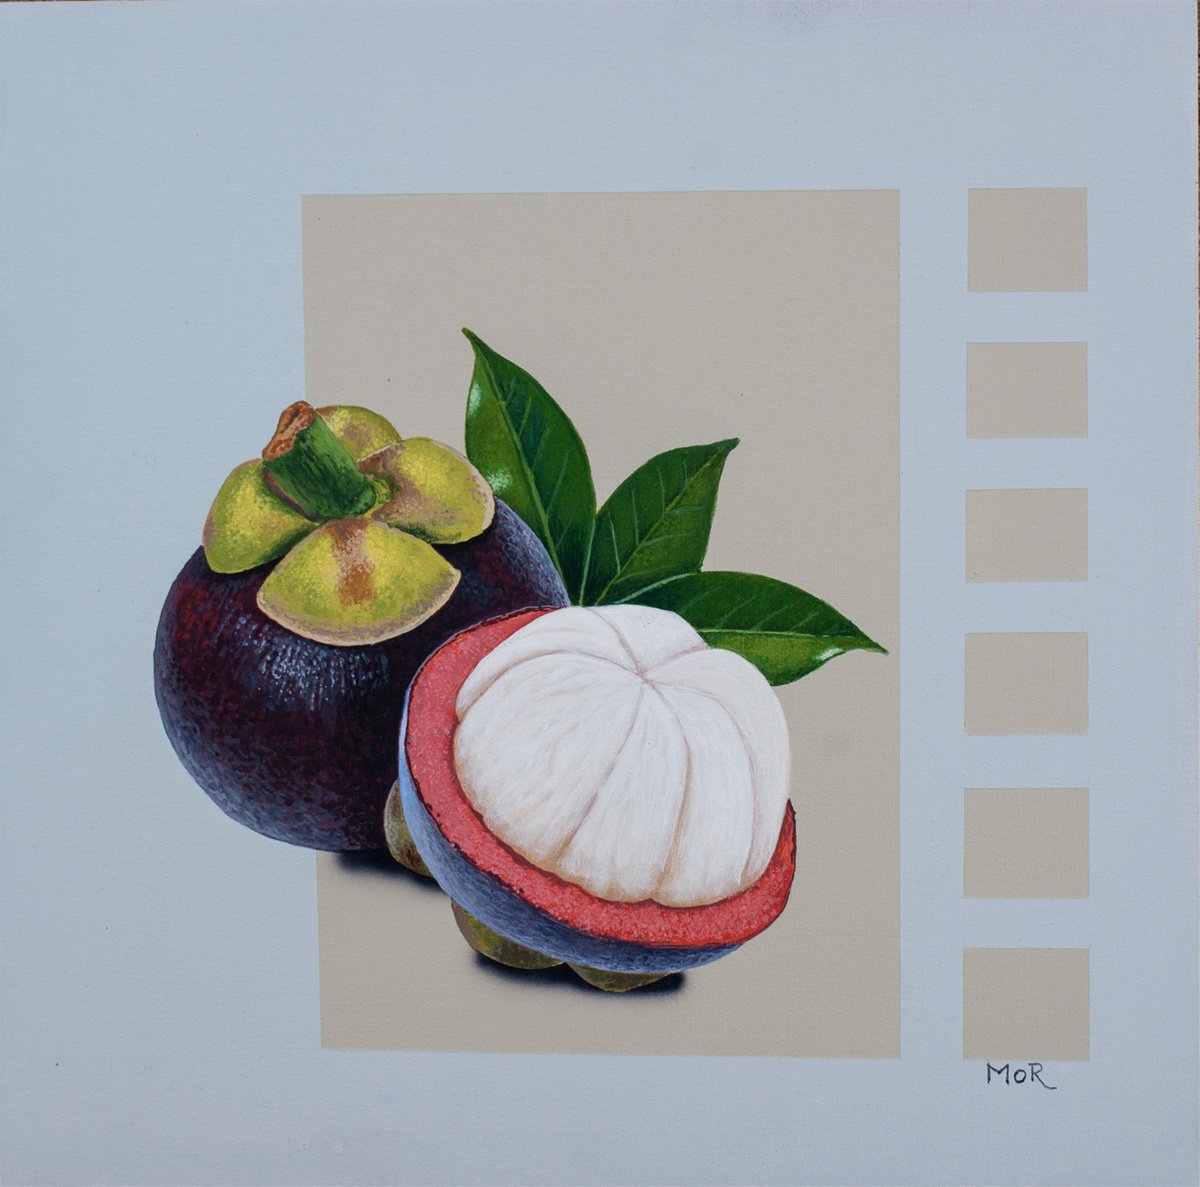 One and a Half Mangosteens by Dietrich Moravec